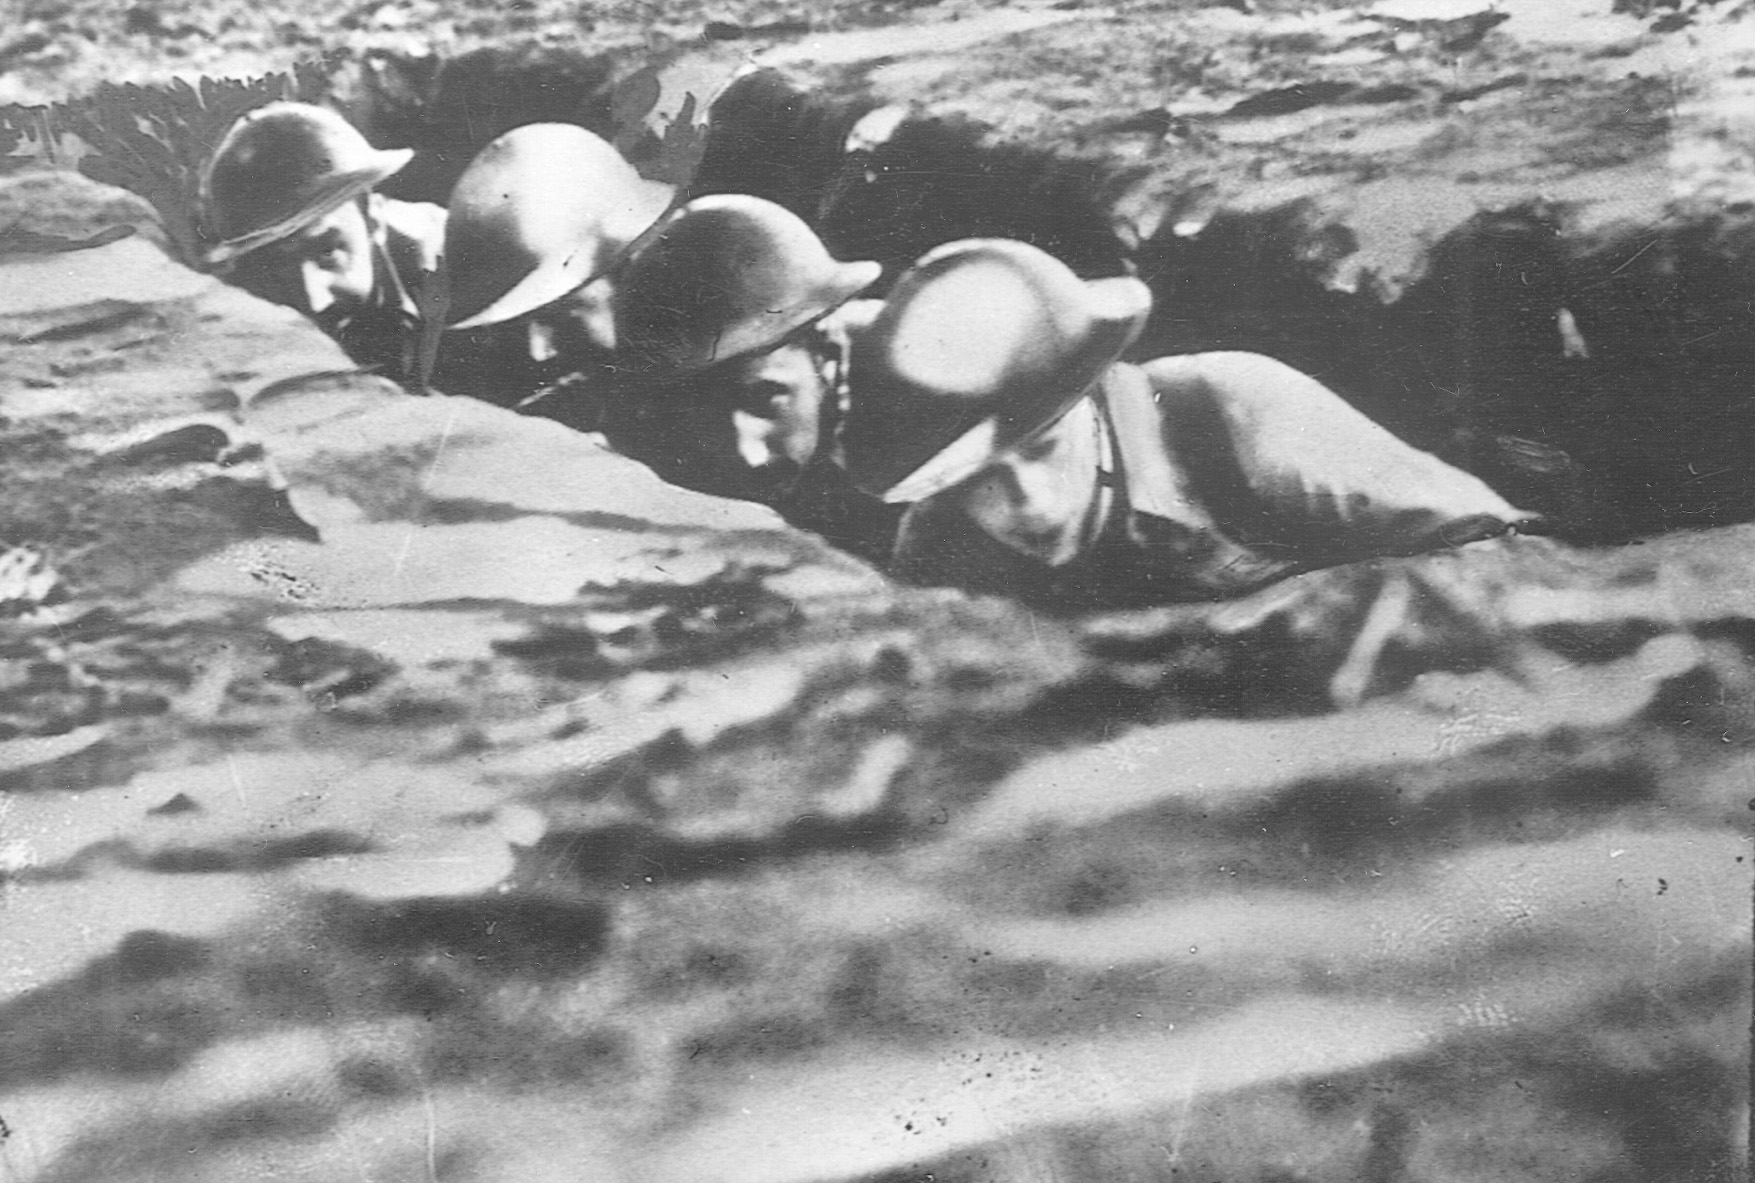 American soldiers hunker down in a trench on embattled Bataan as they come under intense Japanese shellfire.